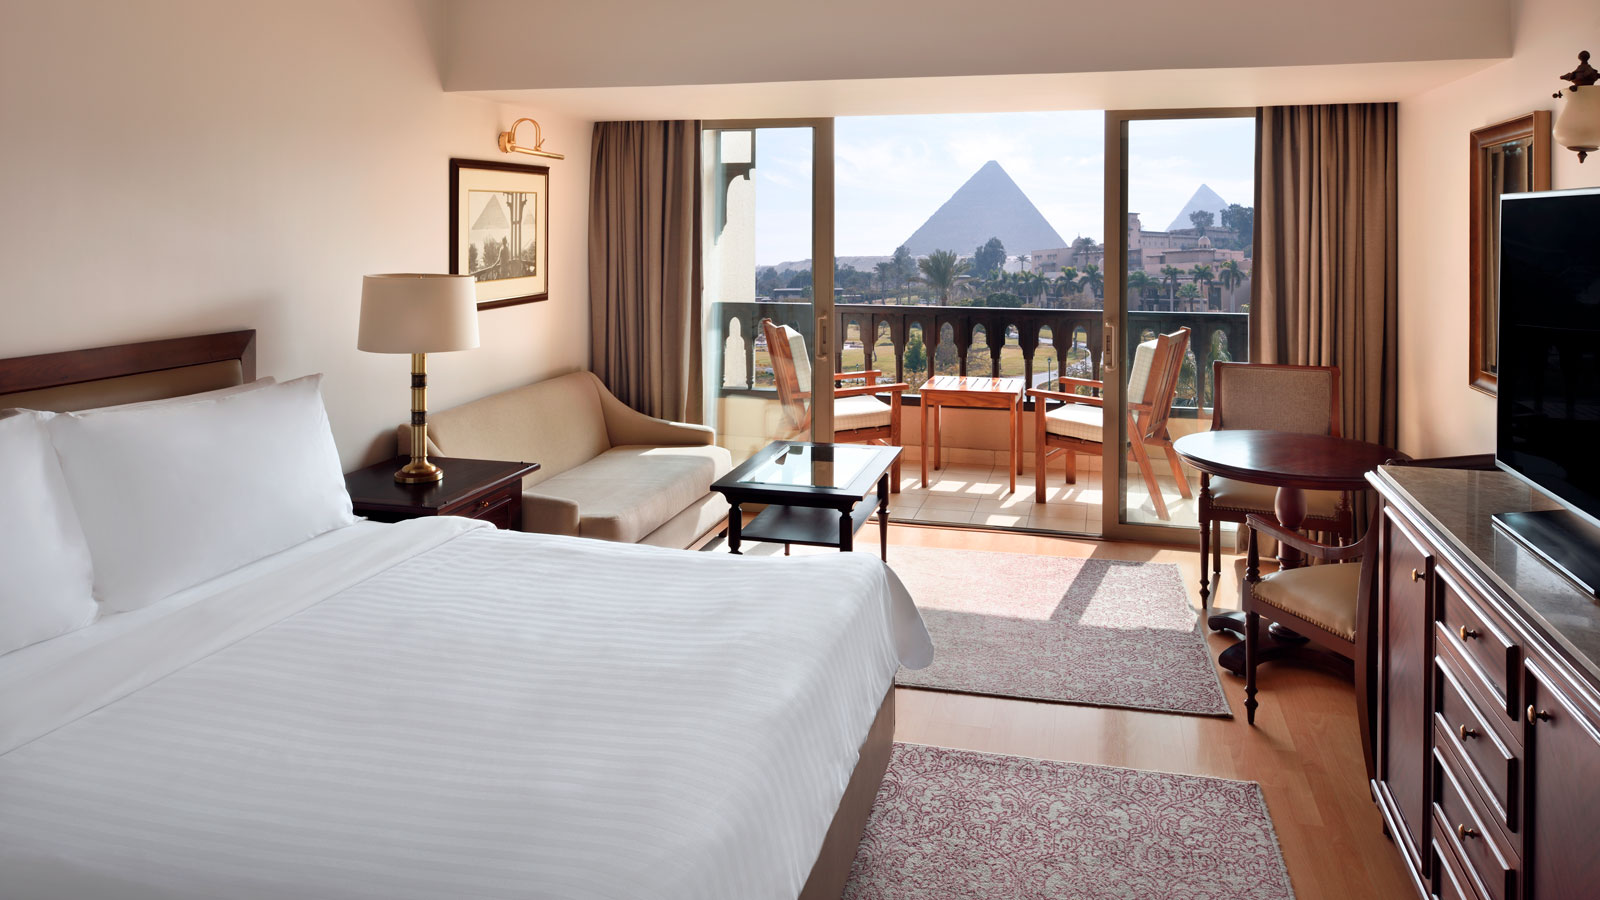 Can unmarried couples stay in hotels in egypt?